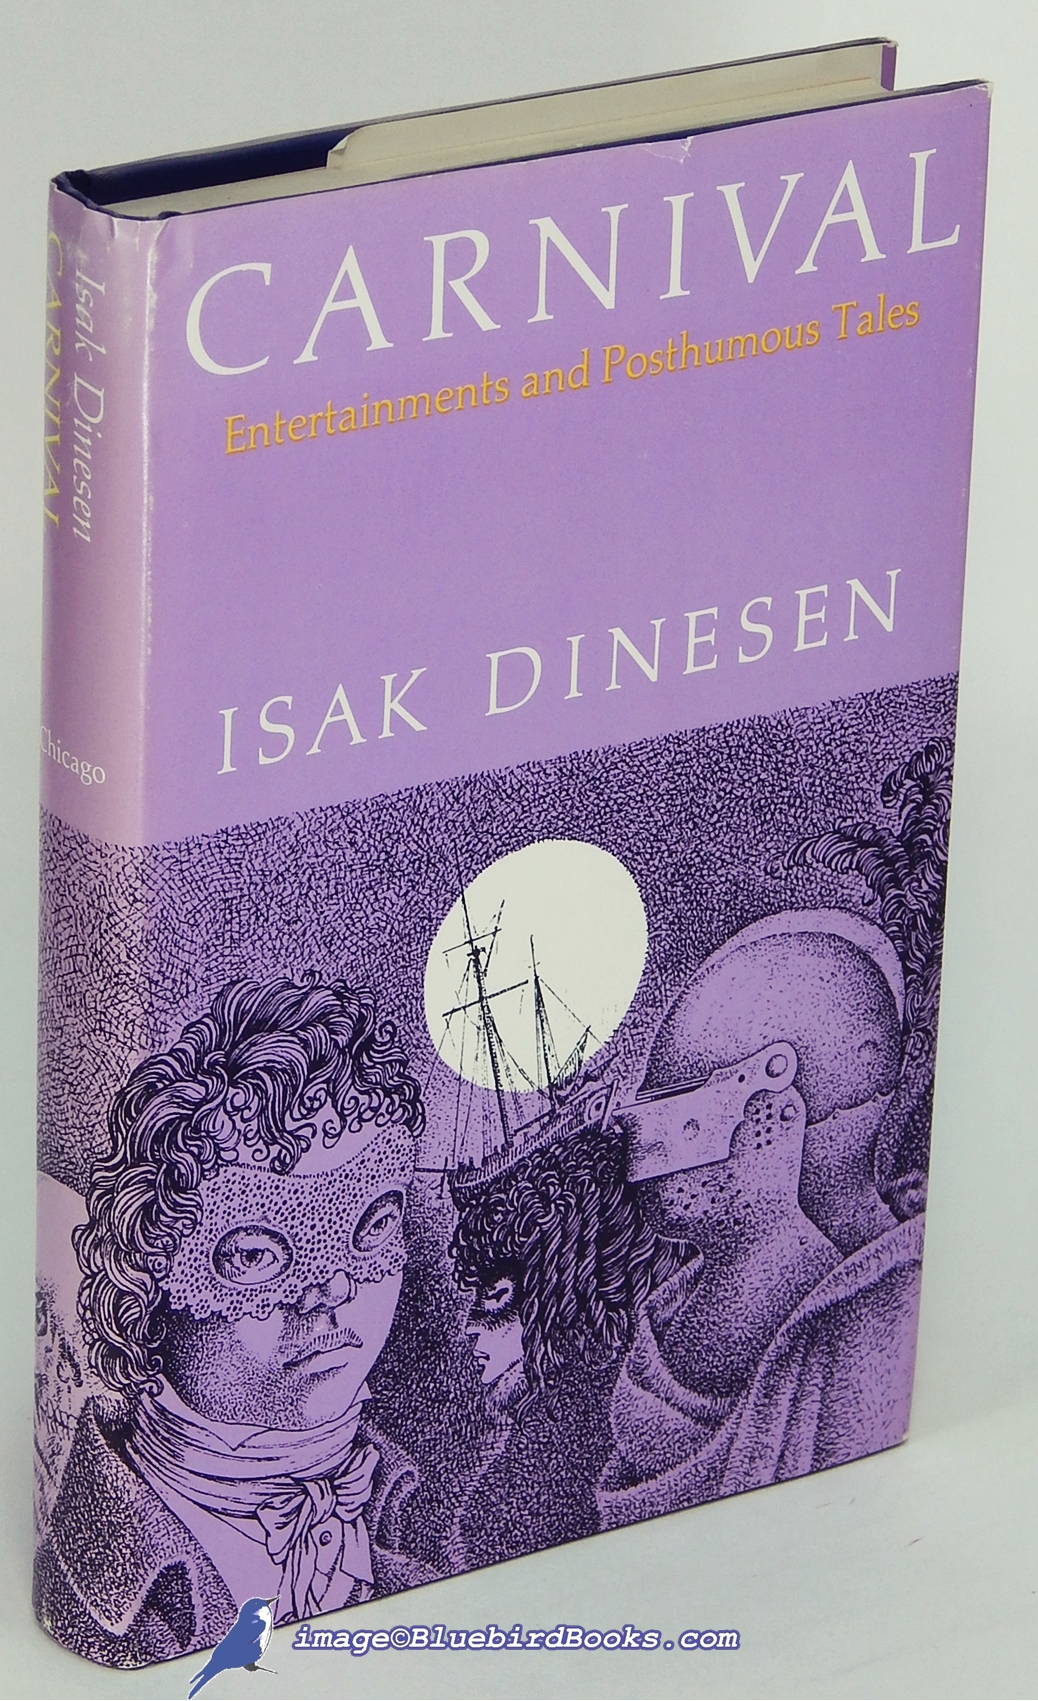 DINESEN, ISAK - Carnival: Entertainments and Posthumous Tales